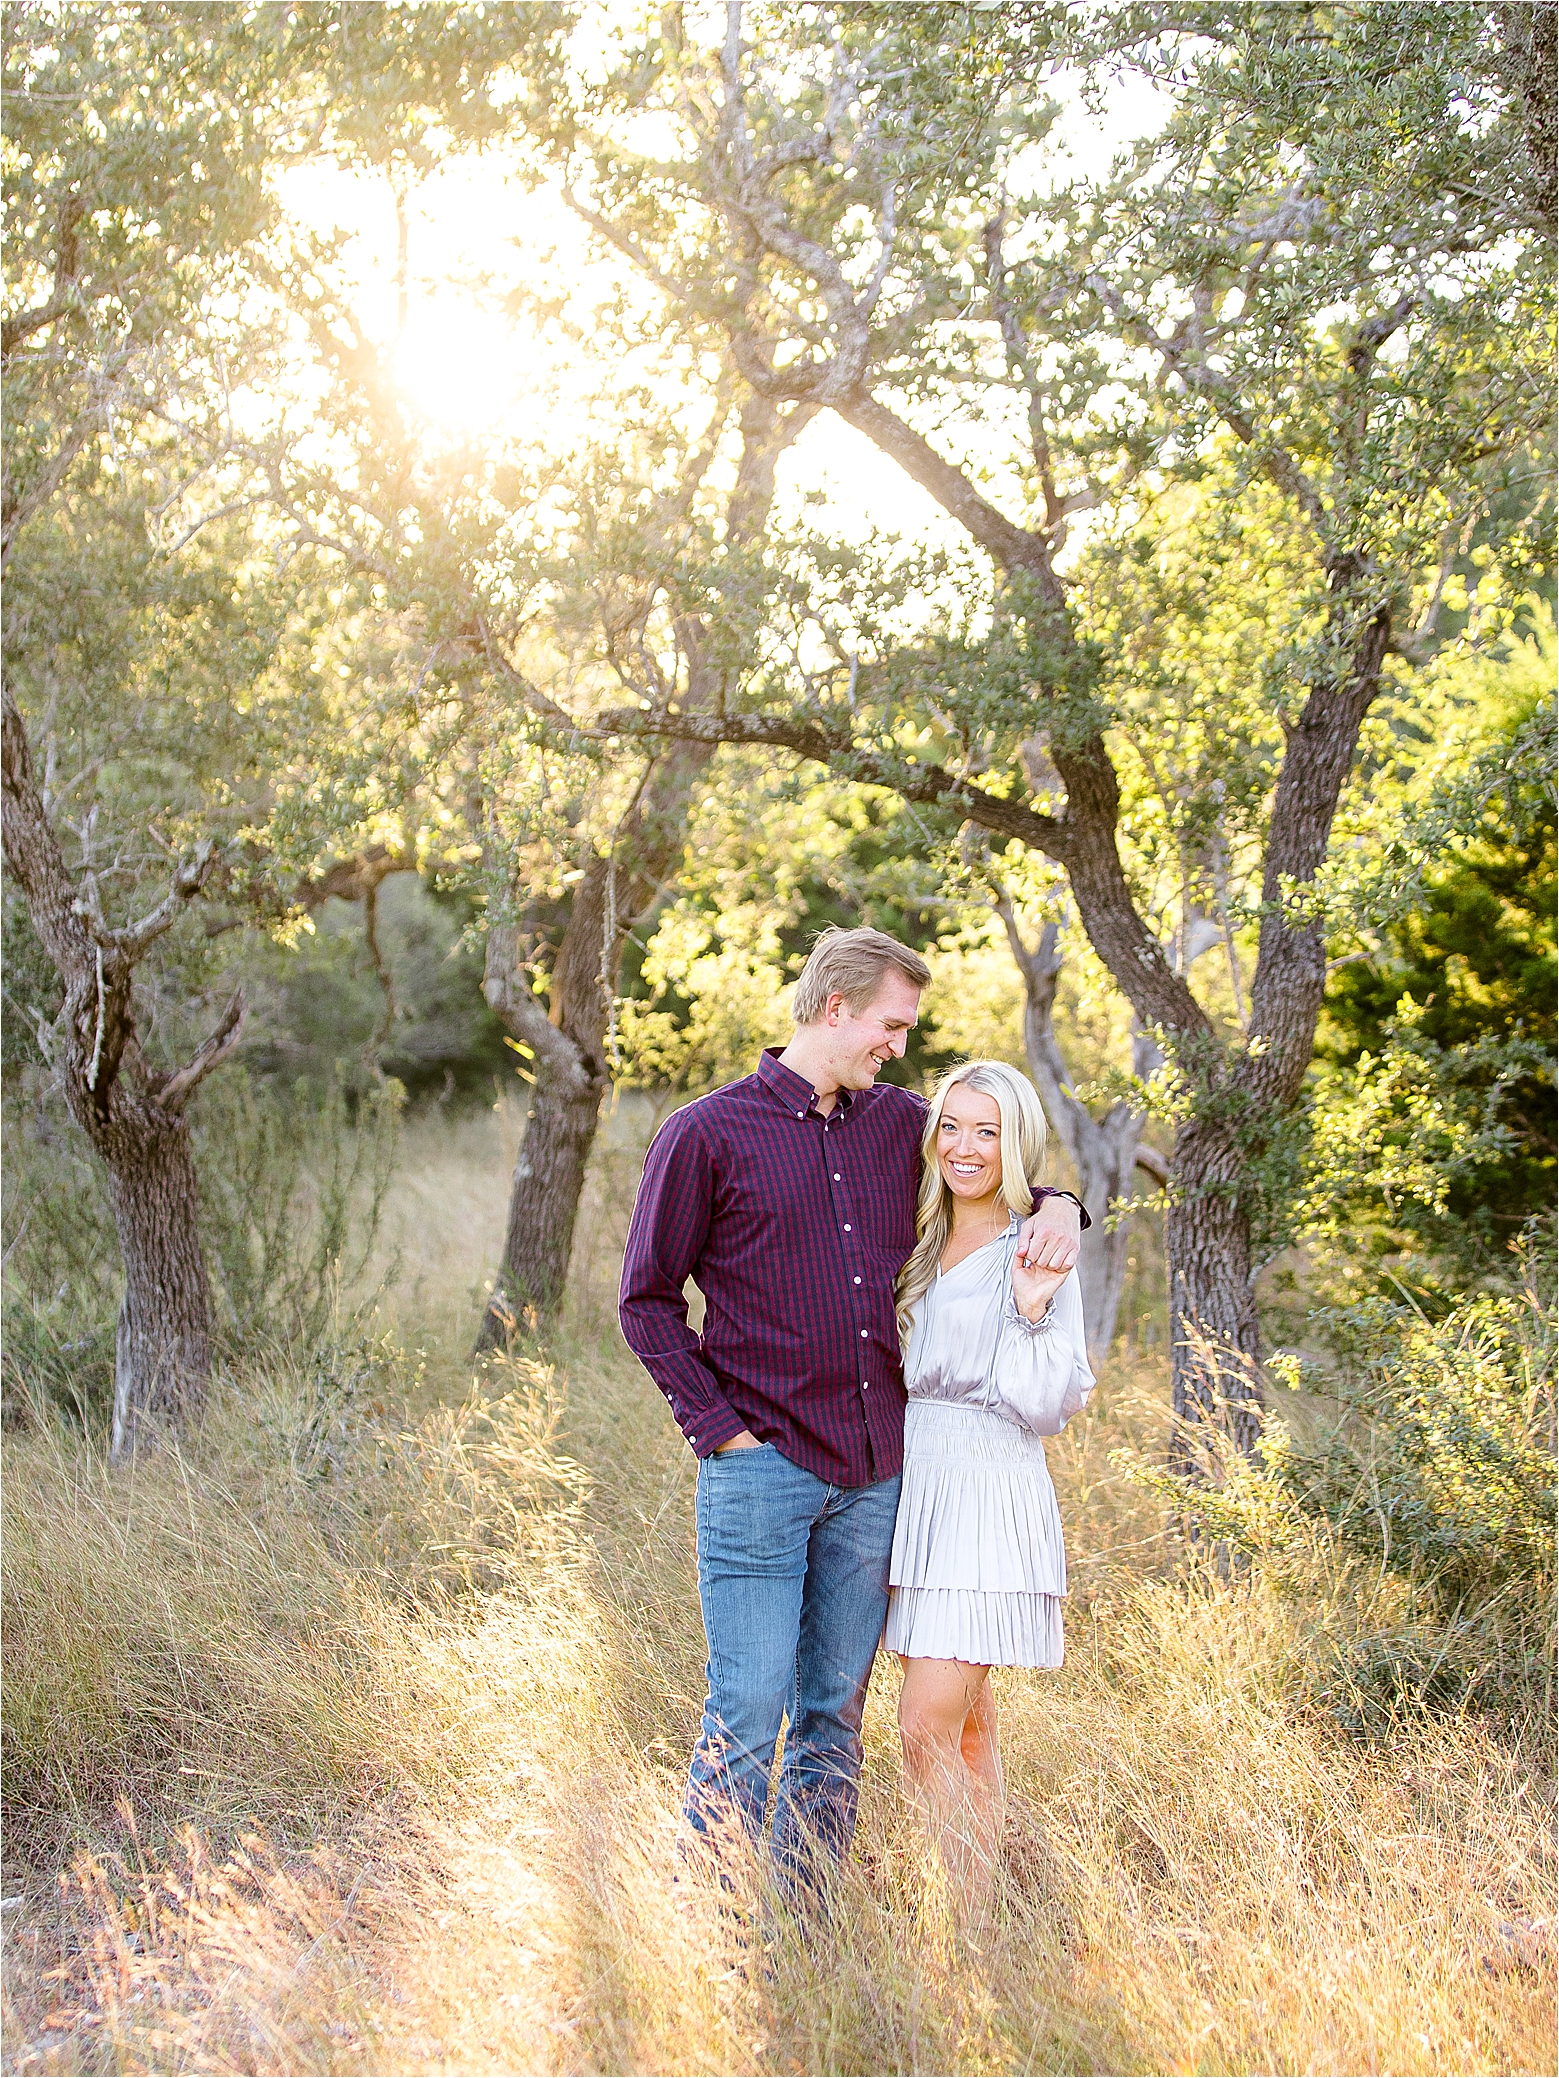 A couple poses in the field with trees and sunshine behind them as the guy puts his arm around her for their Fall Hill Country Engagement Session with San Antonio Wedding Photographer Jillian Hogan 